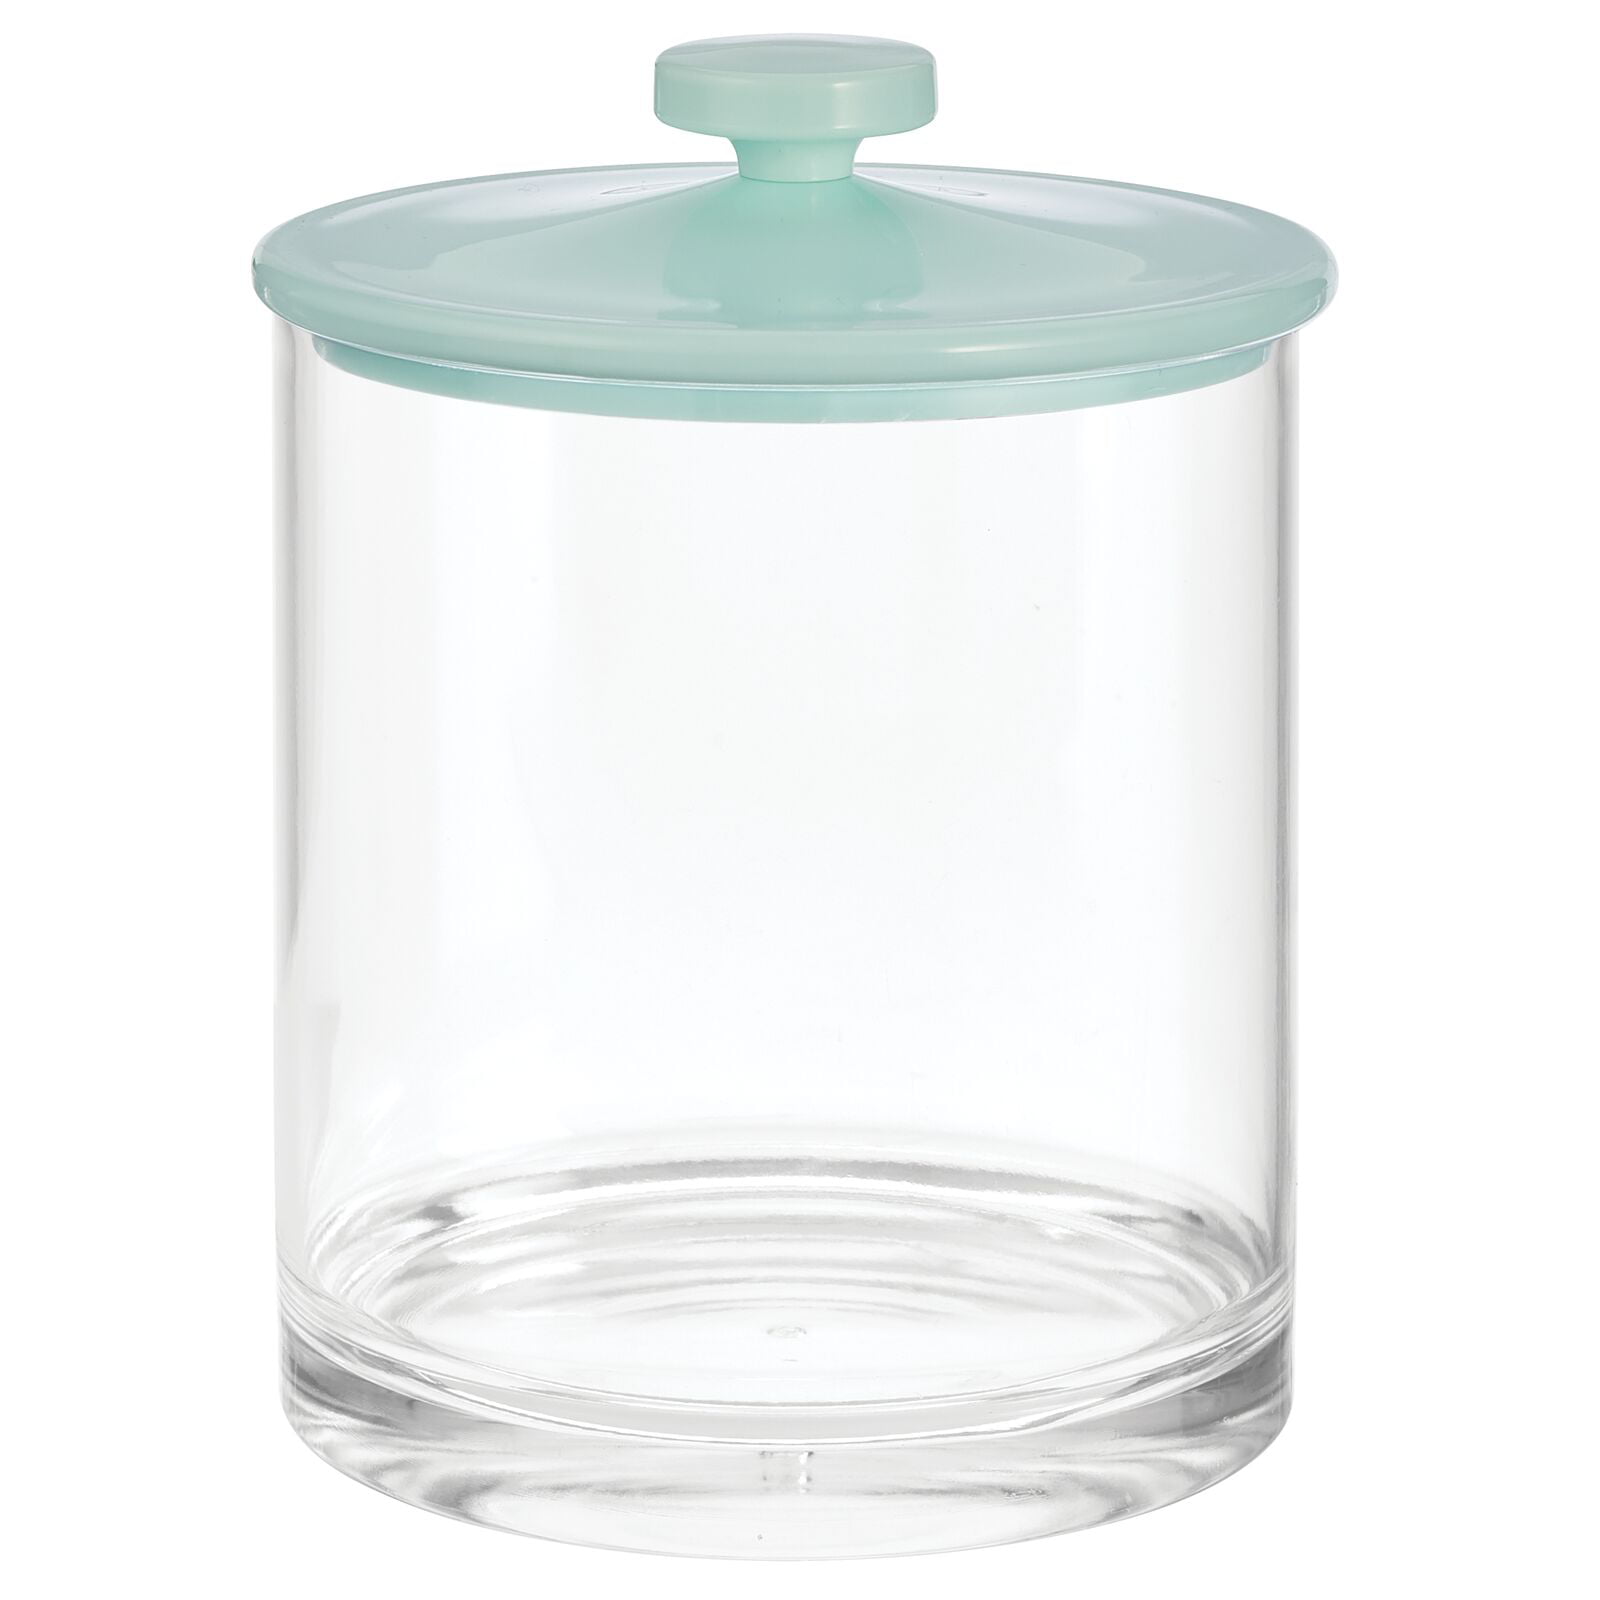 Clear Details about   mDesign Large Plastic Storage Apothecary Jar for Bathroom Vanity 2 Pack 